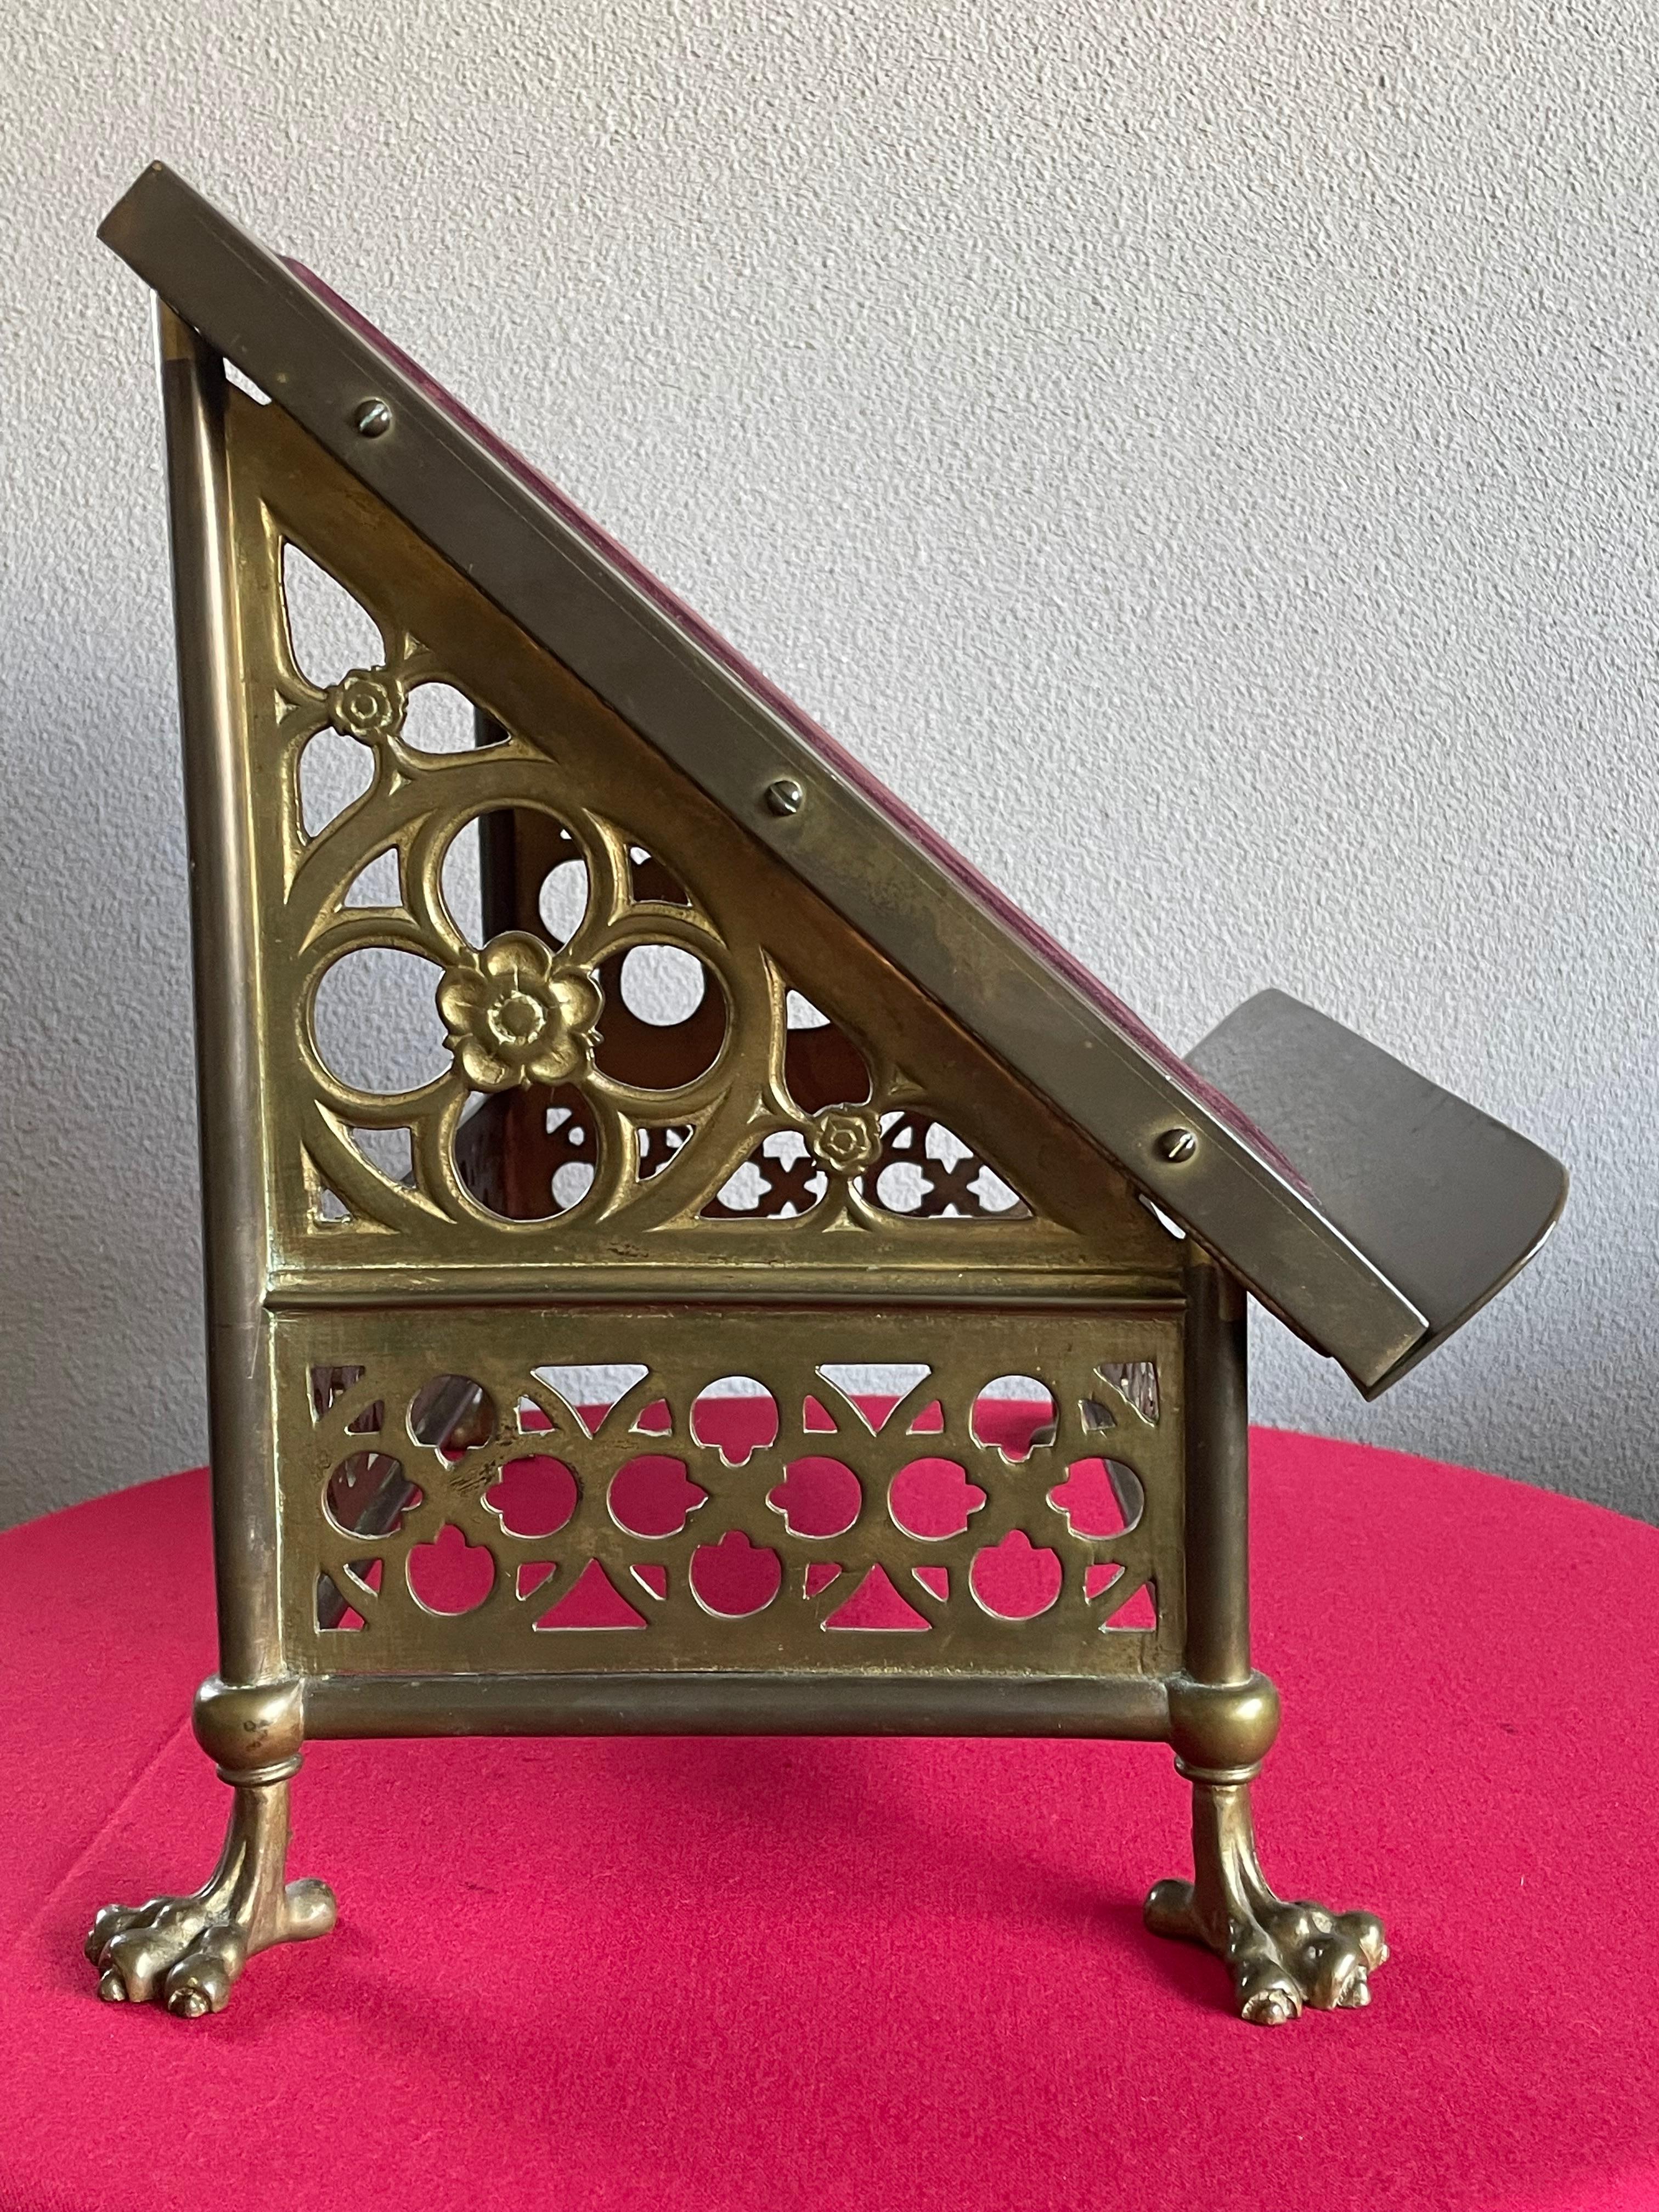 A beautiful and strong quality antique Gothic bible stand.

Over the years we have sold many ecclesiastical antiques, but you hardly ever find them as original and beautiful as this bronze and brass, Gothic Revival bible stand from the late 1800s.